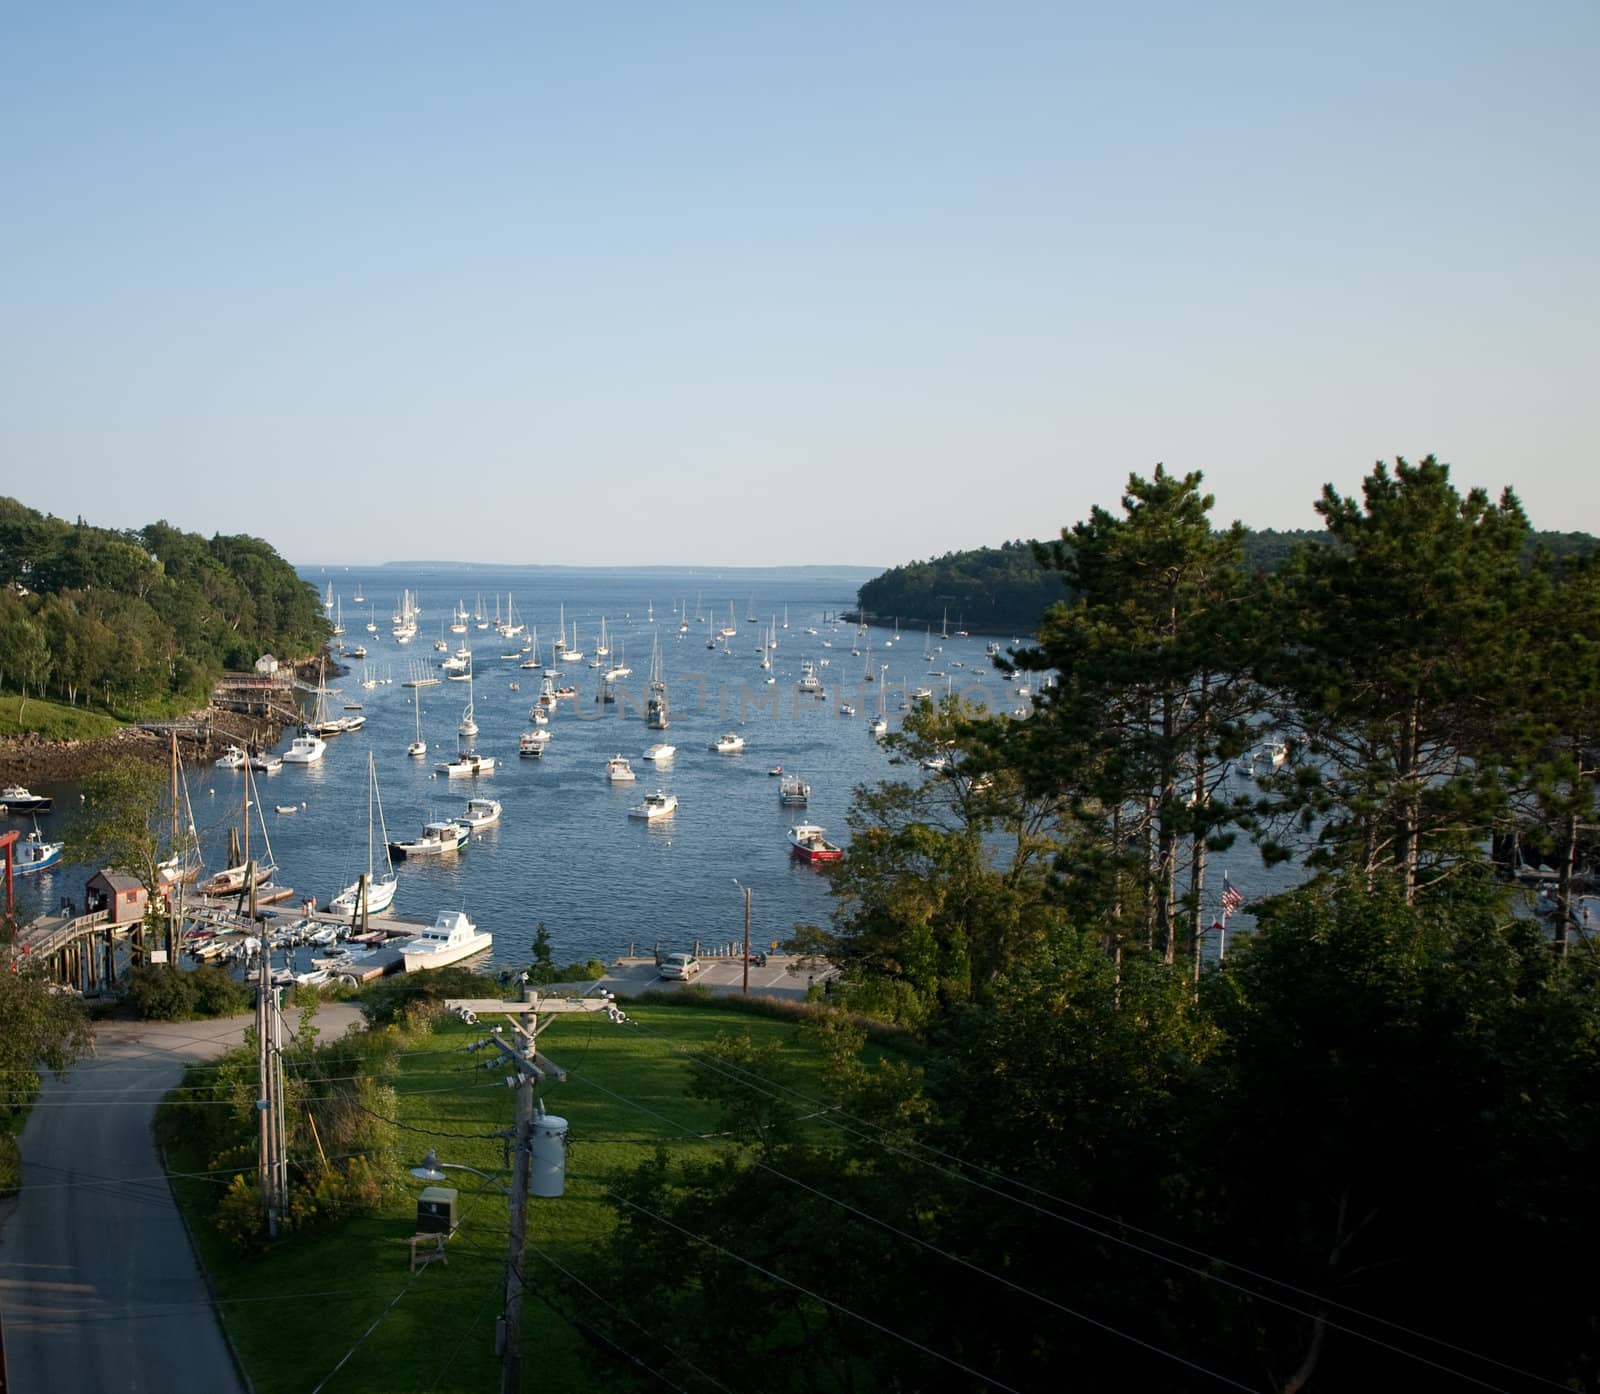 Harbor at Rockport, Maine seen from a high angle